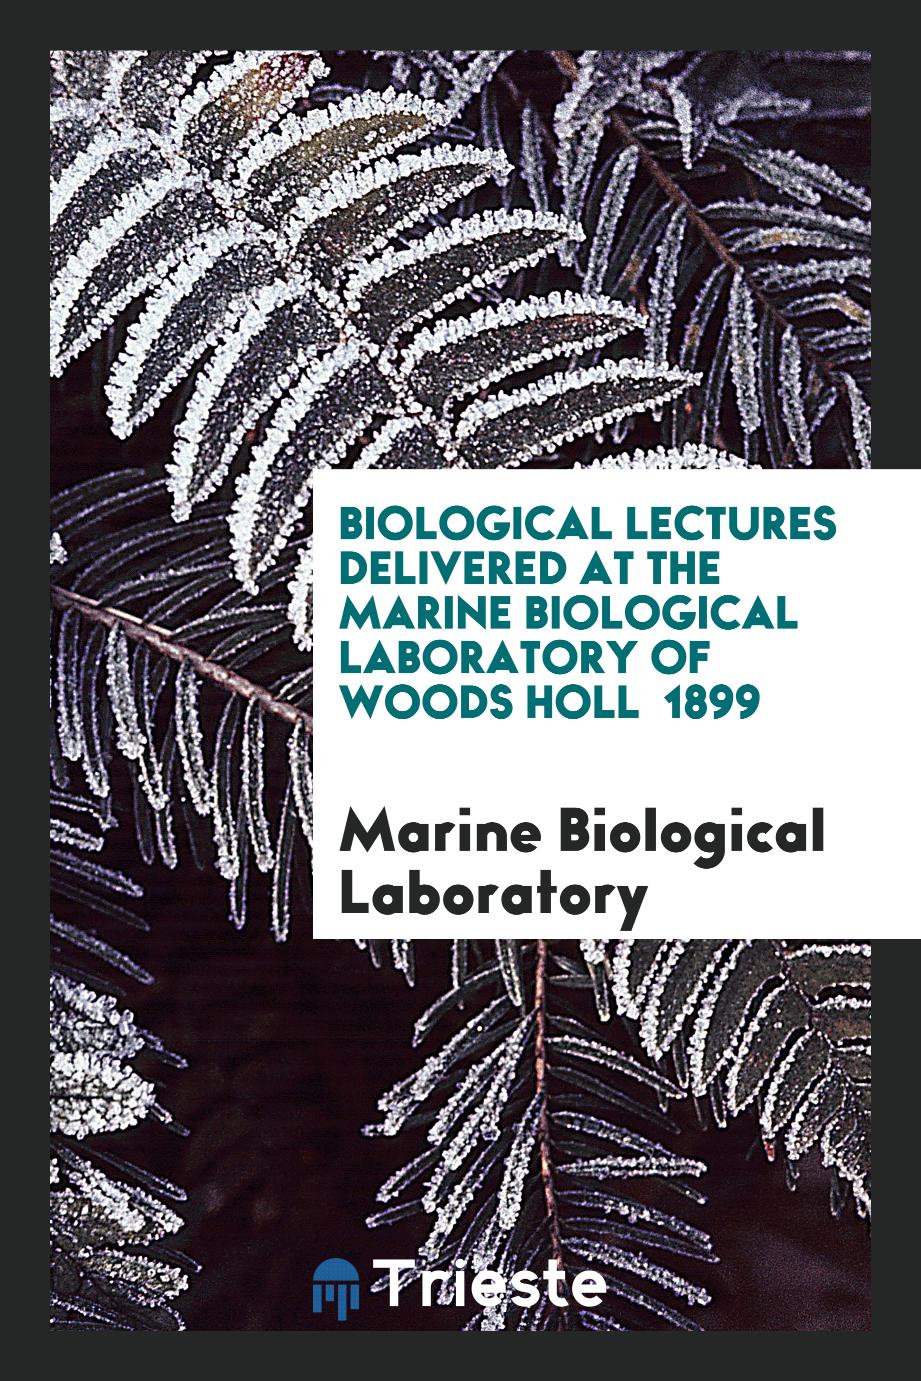 Biological Lectures Delivered at the Marine Biological Laboratory of Woods Holl 1899